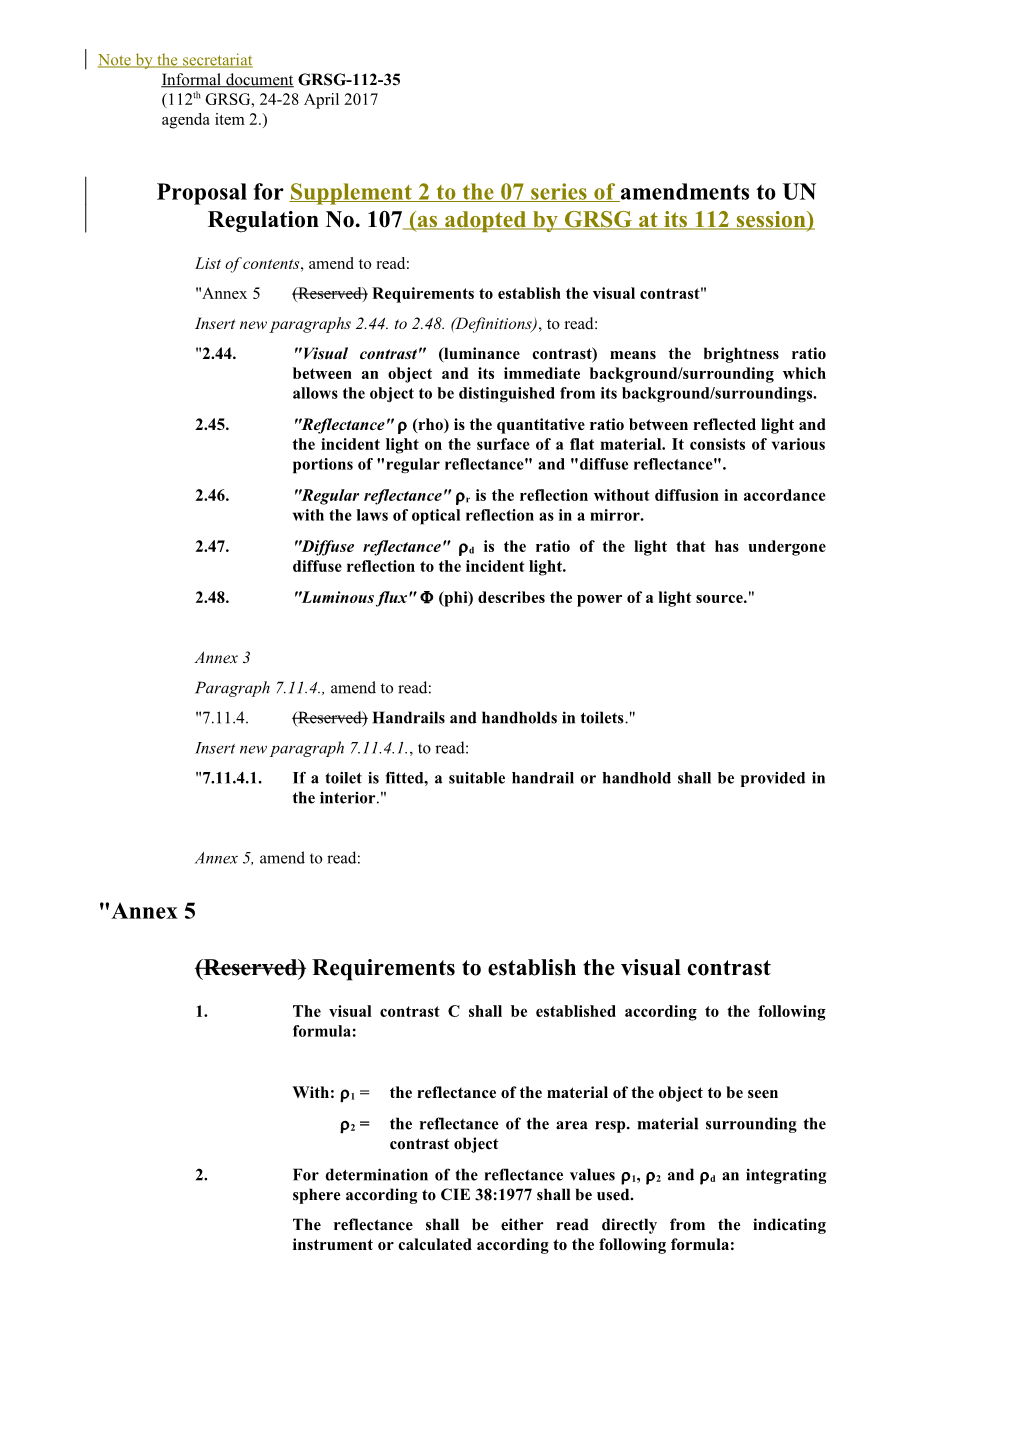 Proposal for Supplement 2 to the 07 Series of Amendments to UN Regulation No. 107 (As Adopted